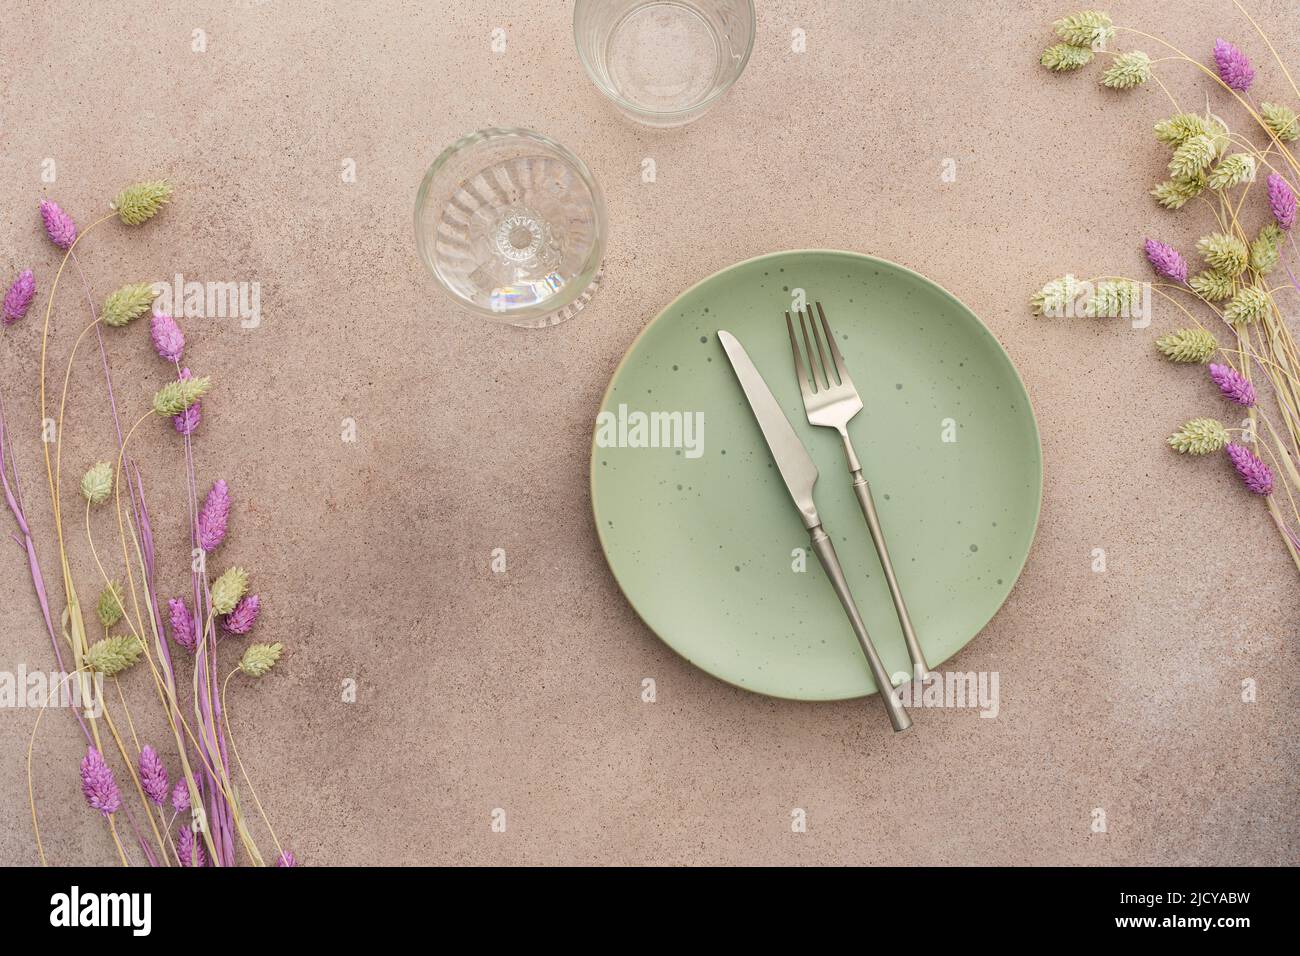 Table setting, empty green plate and cutlery on a concrete background, top view of the served table decorated with dry flowers Stock Photo